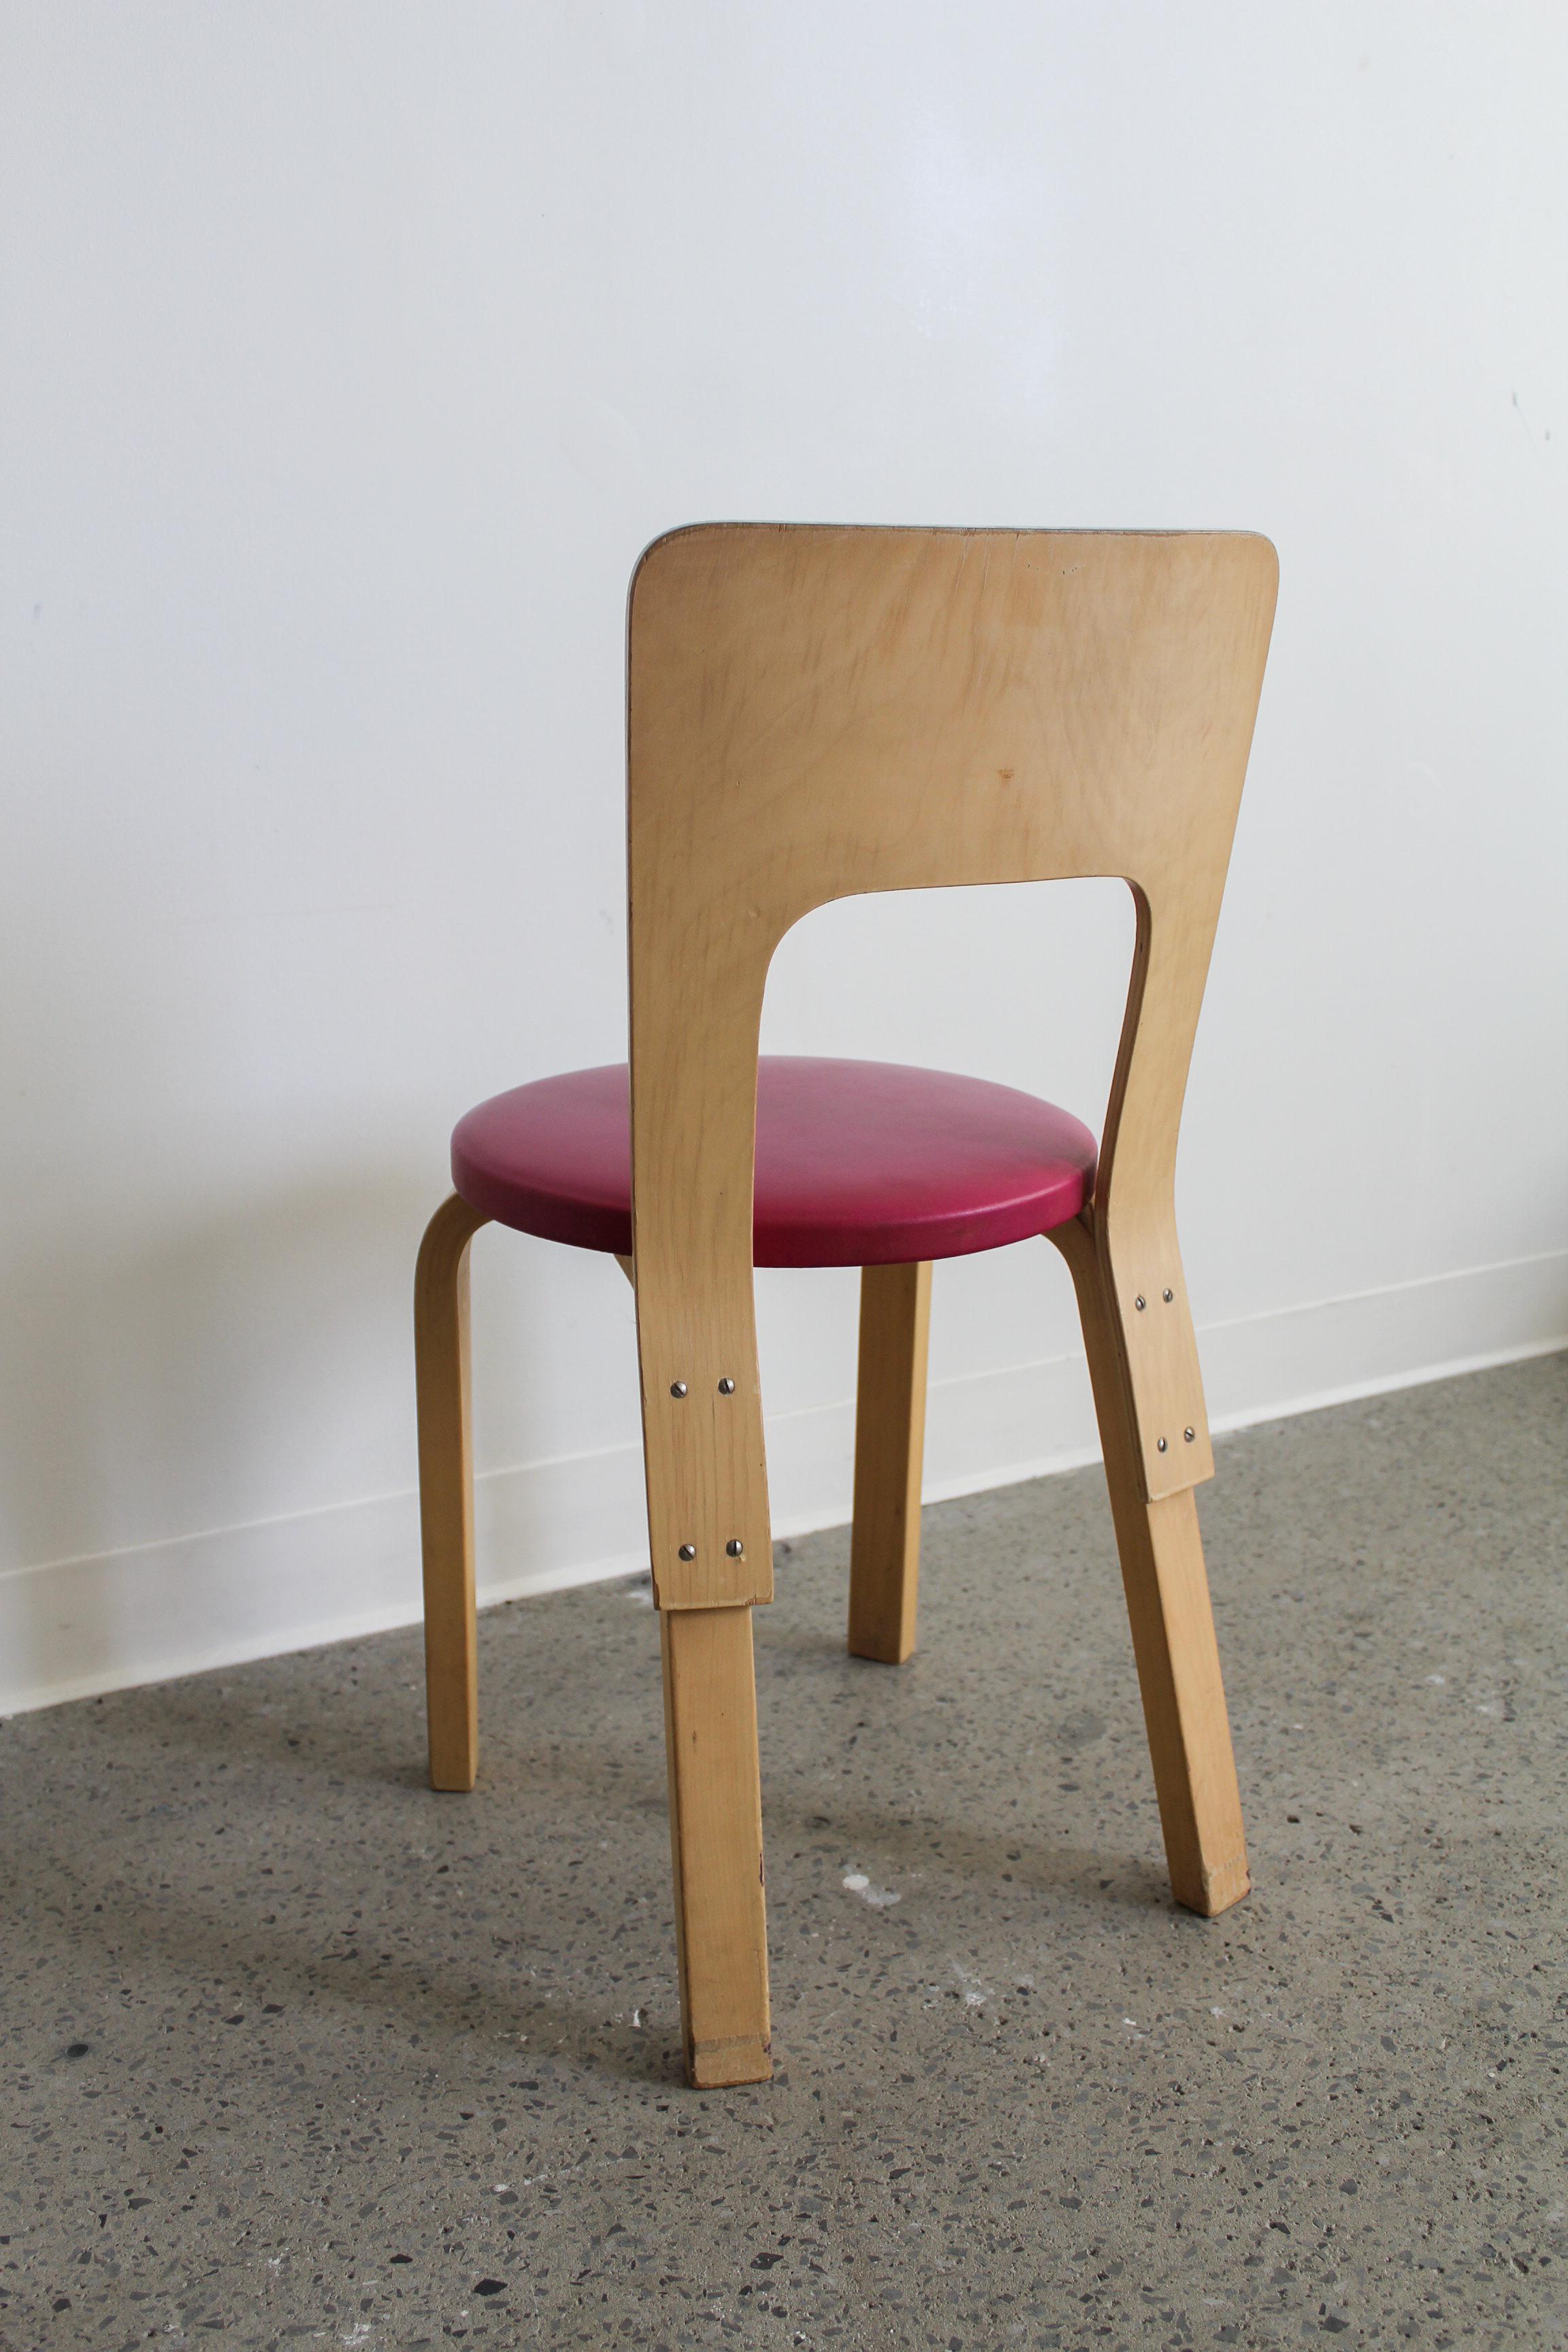 Model 66 Chair by Alvar Aalto for Artek, 1960s. Birchwood frame with fuchsia upholstered seat.

In good vintage condition, small tear in seat and wear to wood back.

Dimensions: 30